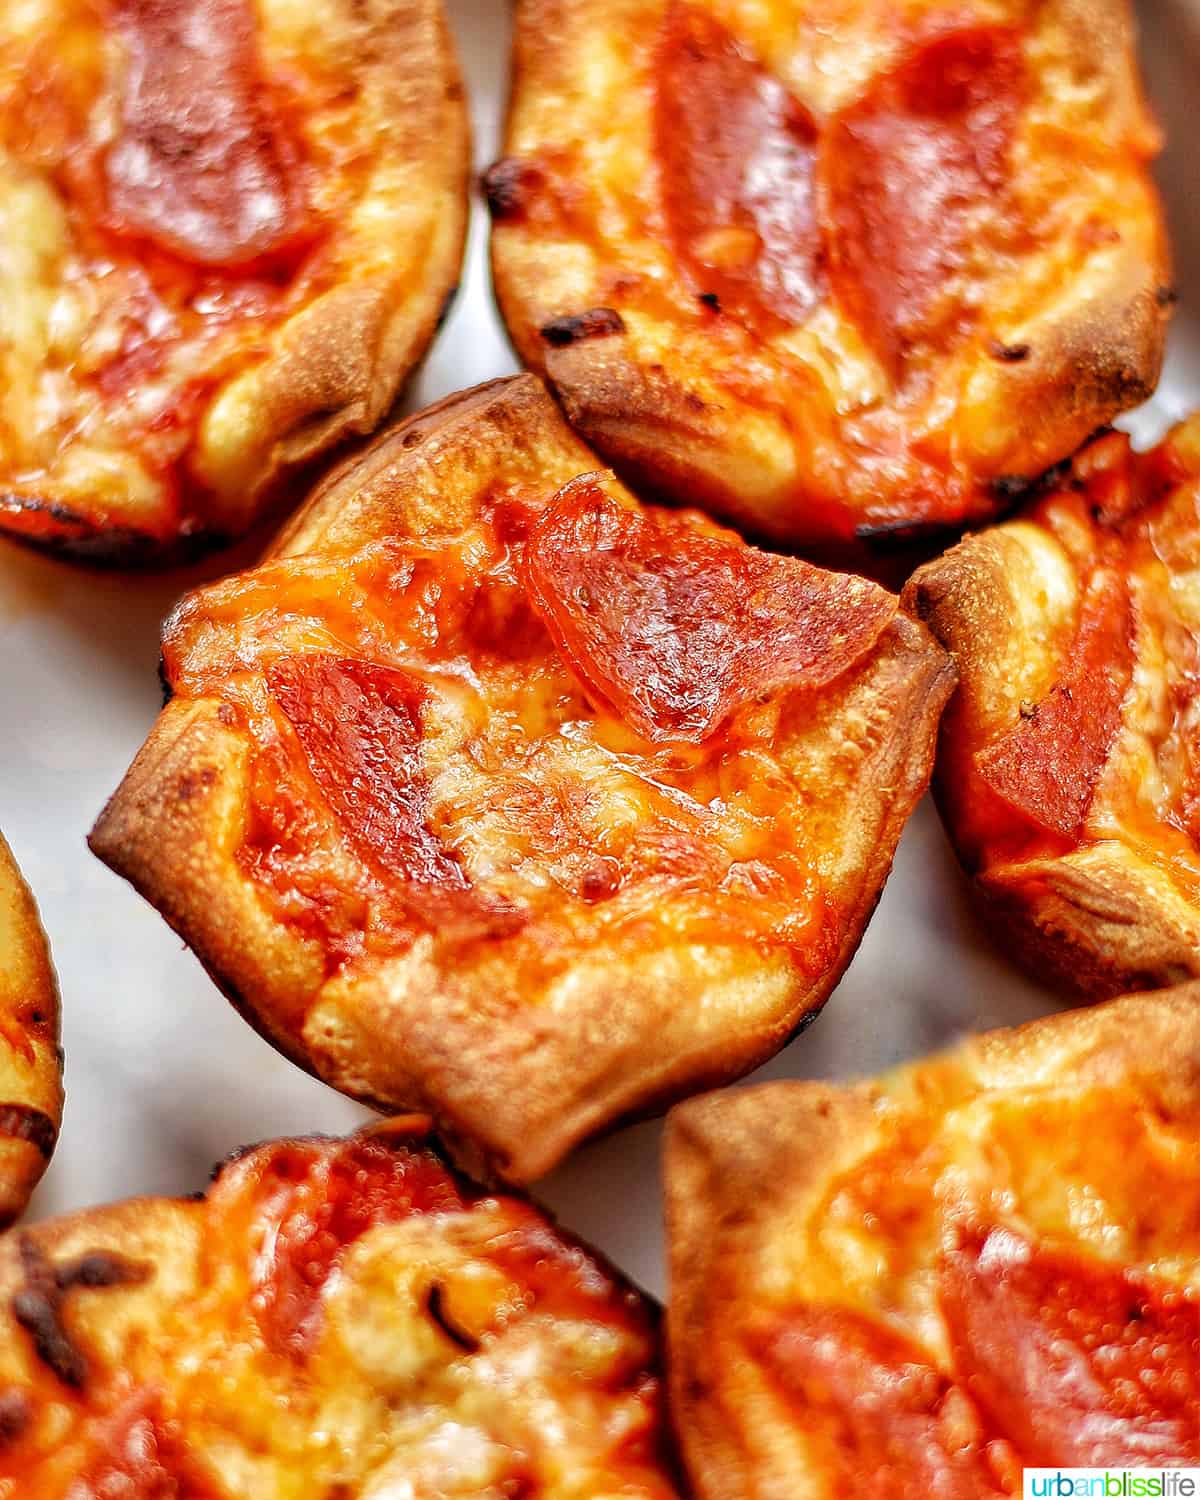 https://urbanblisslife.com/wp-content/uploads/2021/09/pizza-cups-done-close-up.jpg